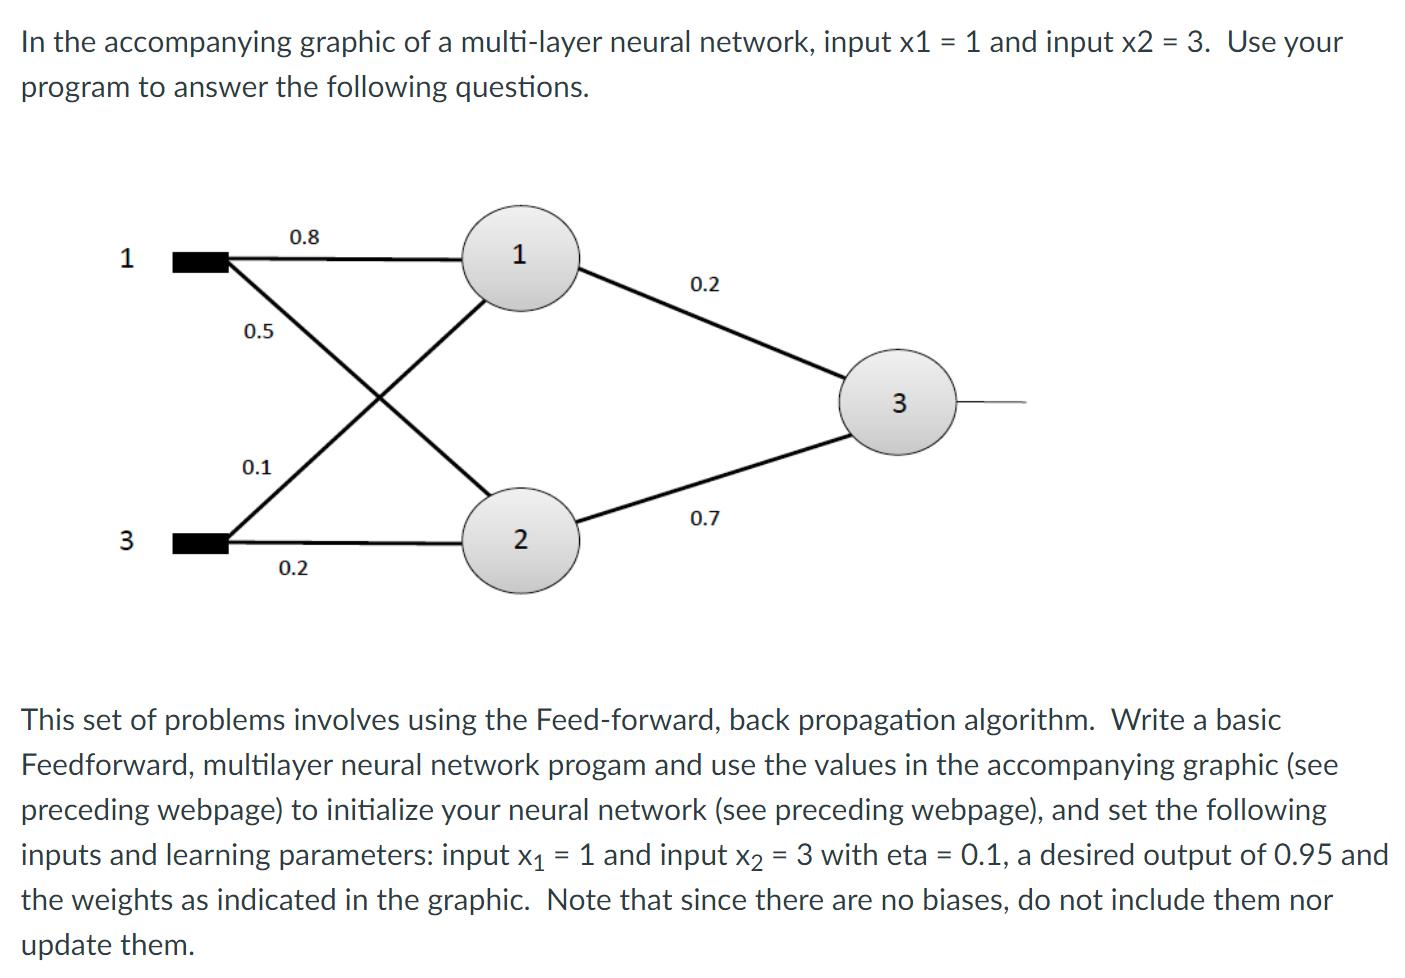 In the accompanying graphic of a multi-layer neural network, input x1 = 1 and input x2 = 3. Use your program